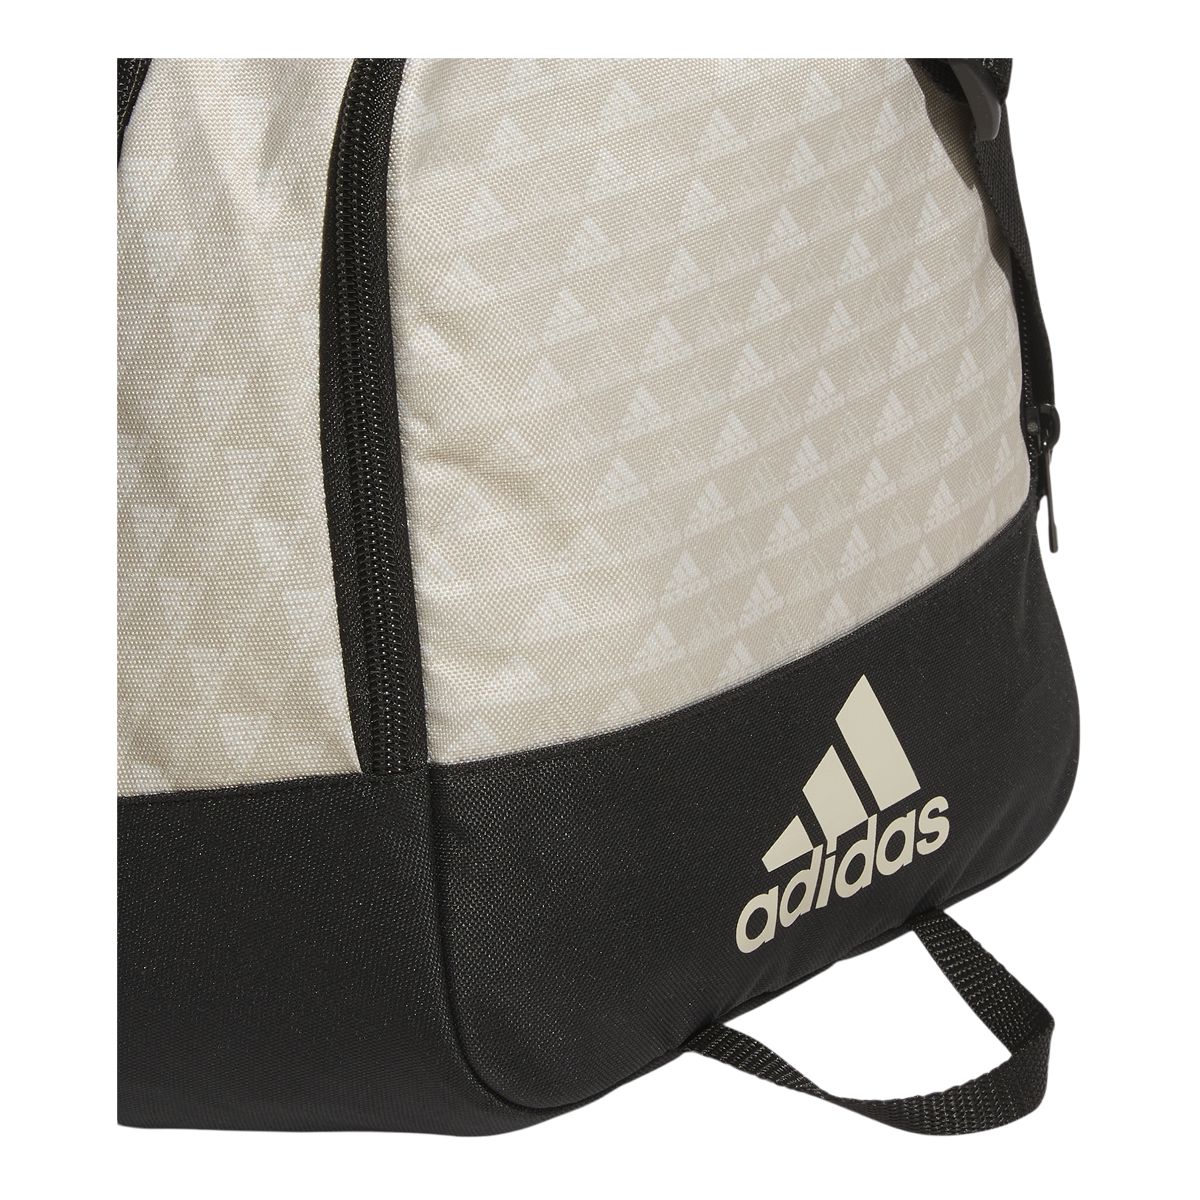 Shop adidas Defender 4 Small Duffel Bag, Jers – Luggage Factory